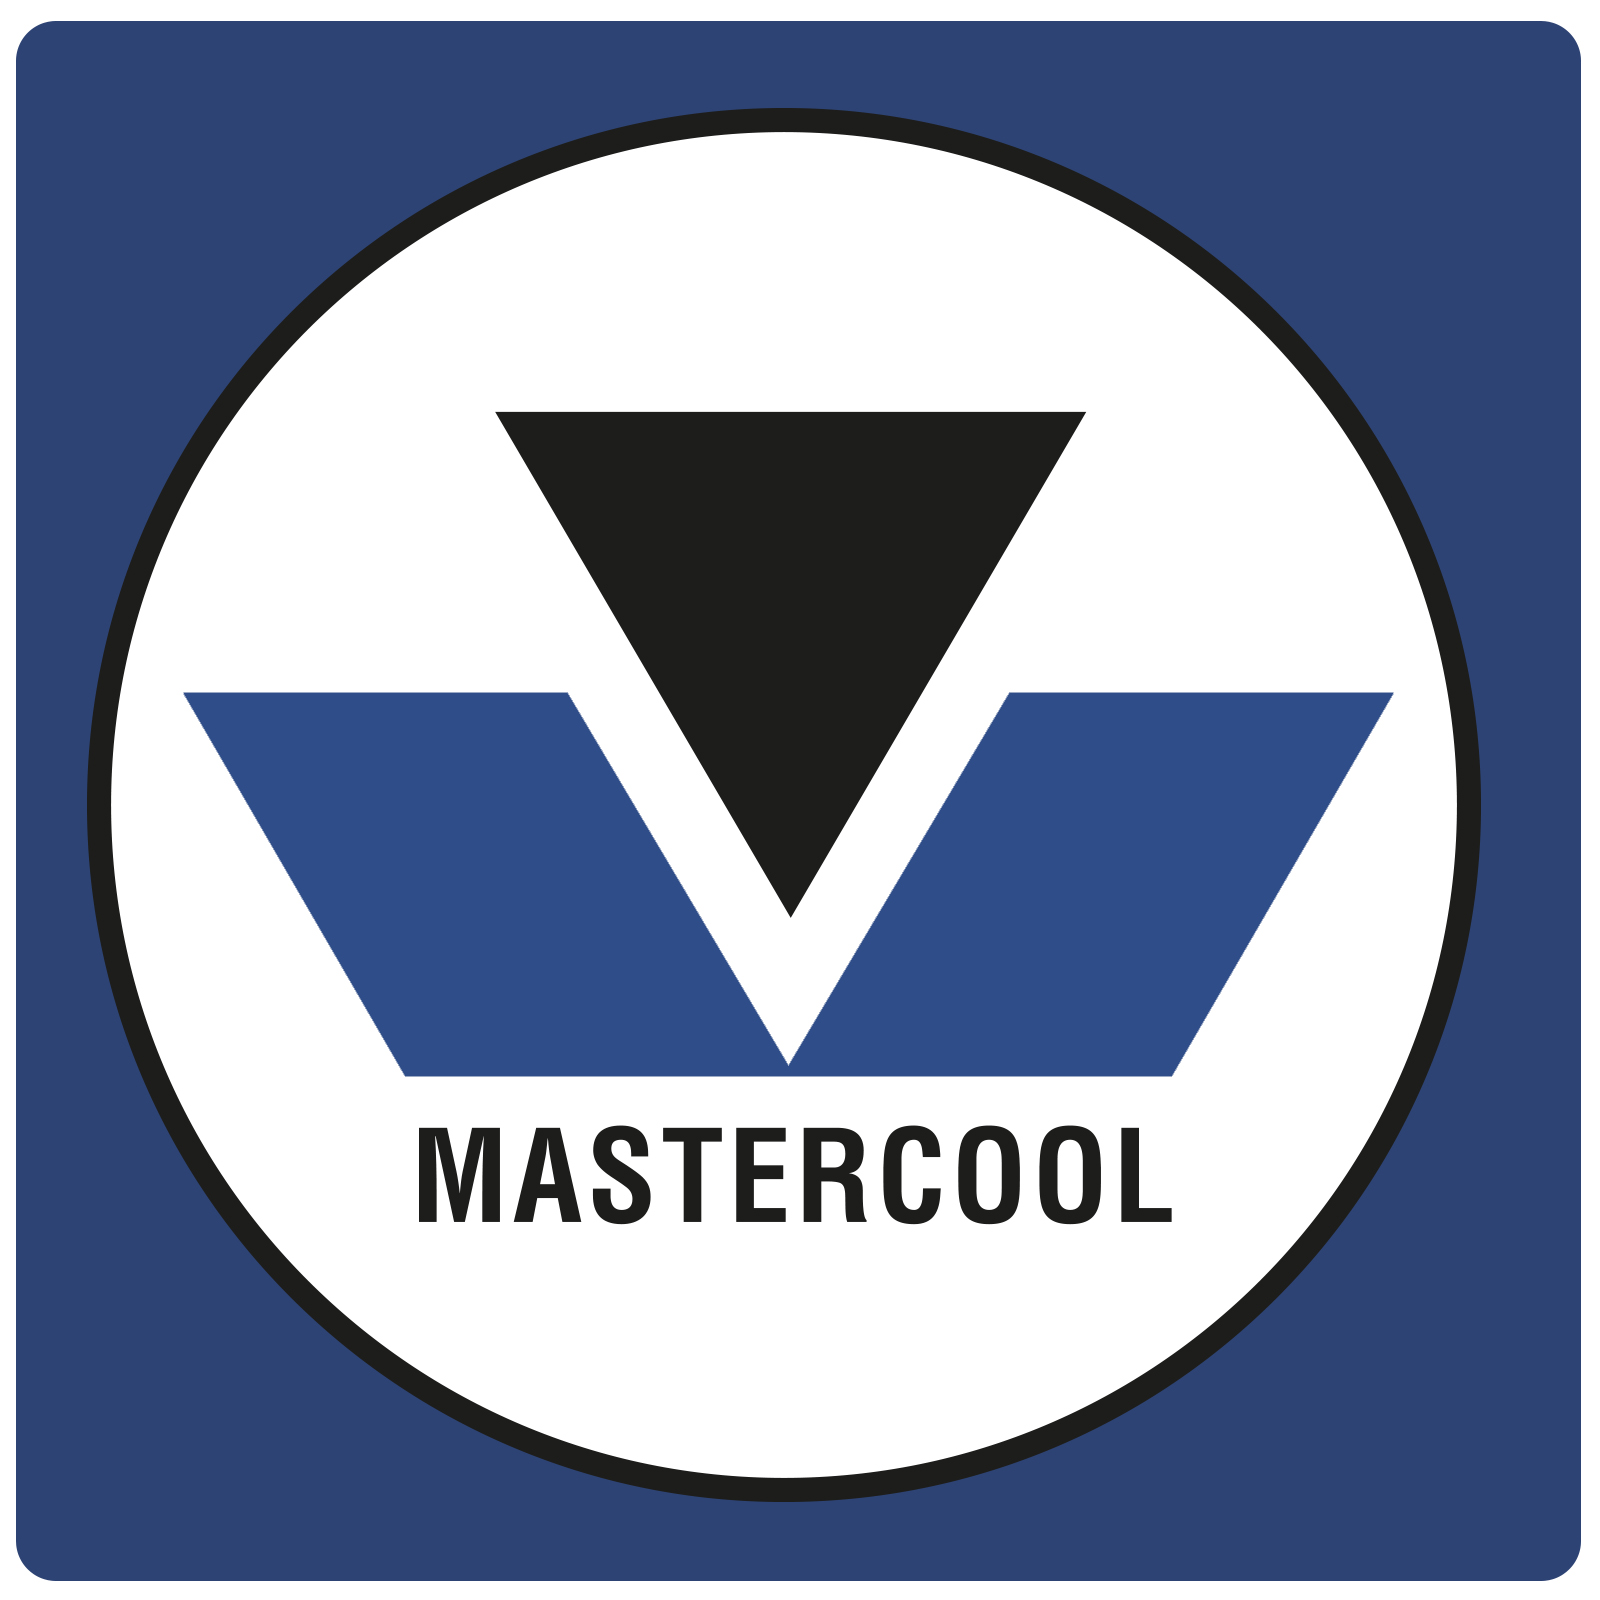 Mastercool Inc., Manufacturer of Air Conditioning, Refrigeration